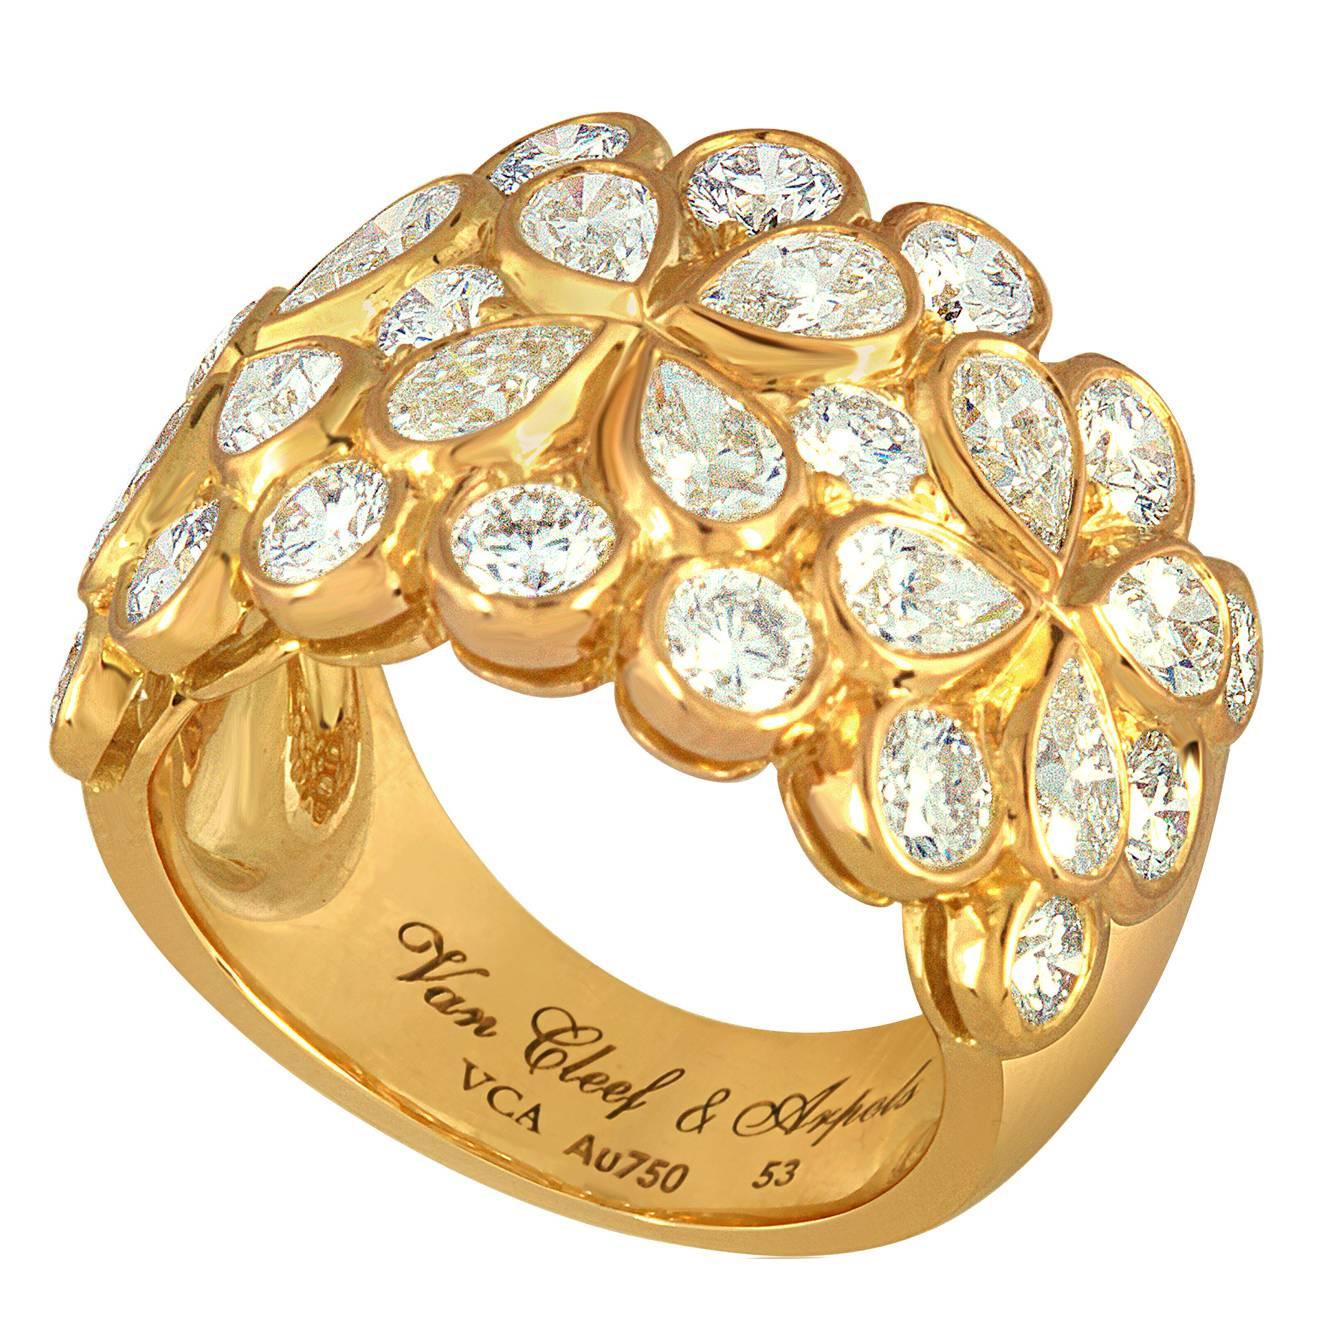 Van Cleef & Arpels "Rosee" 4.25 Carats Diamond Gold Floral Band Ring For Sale